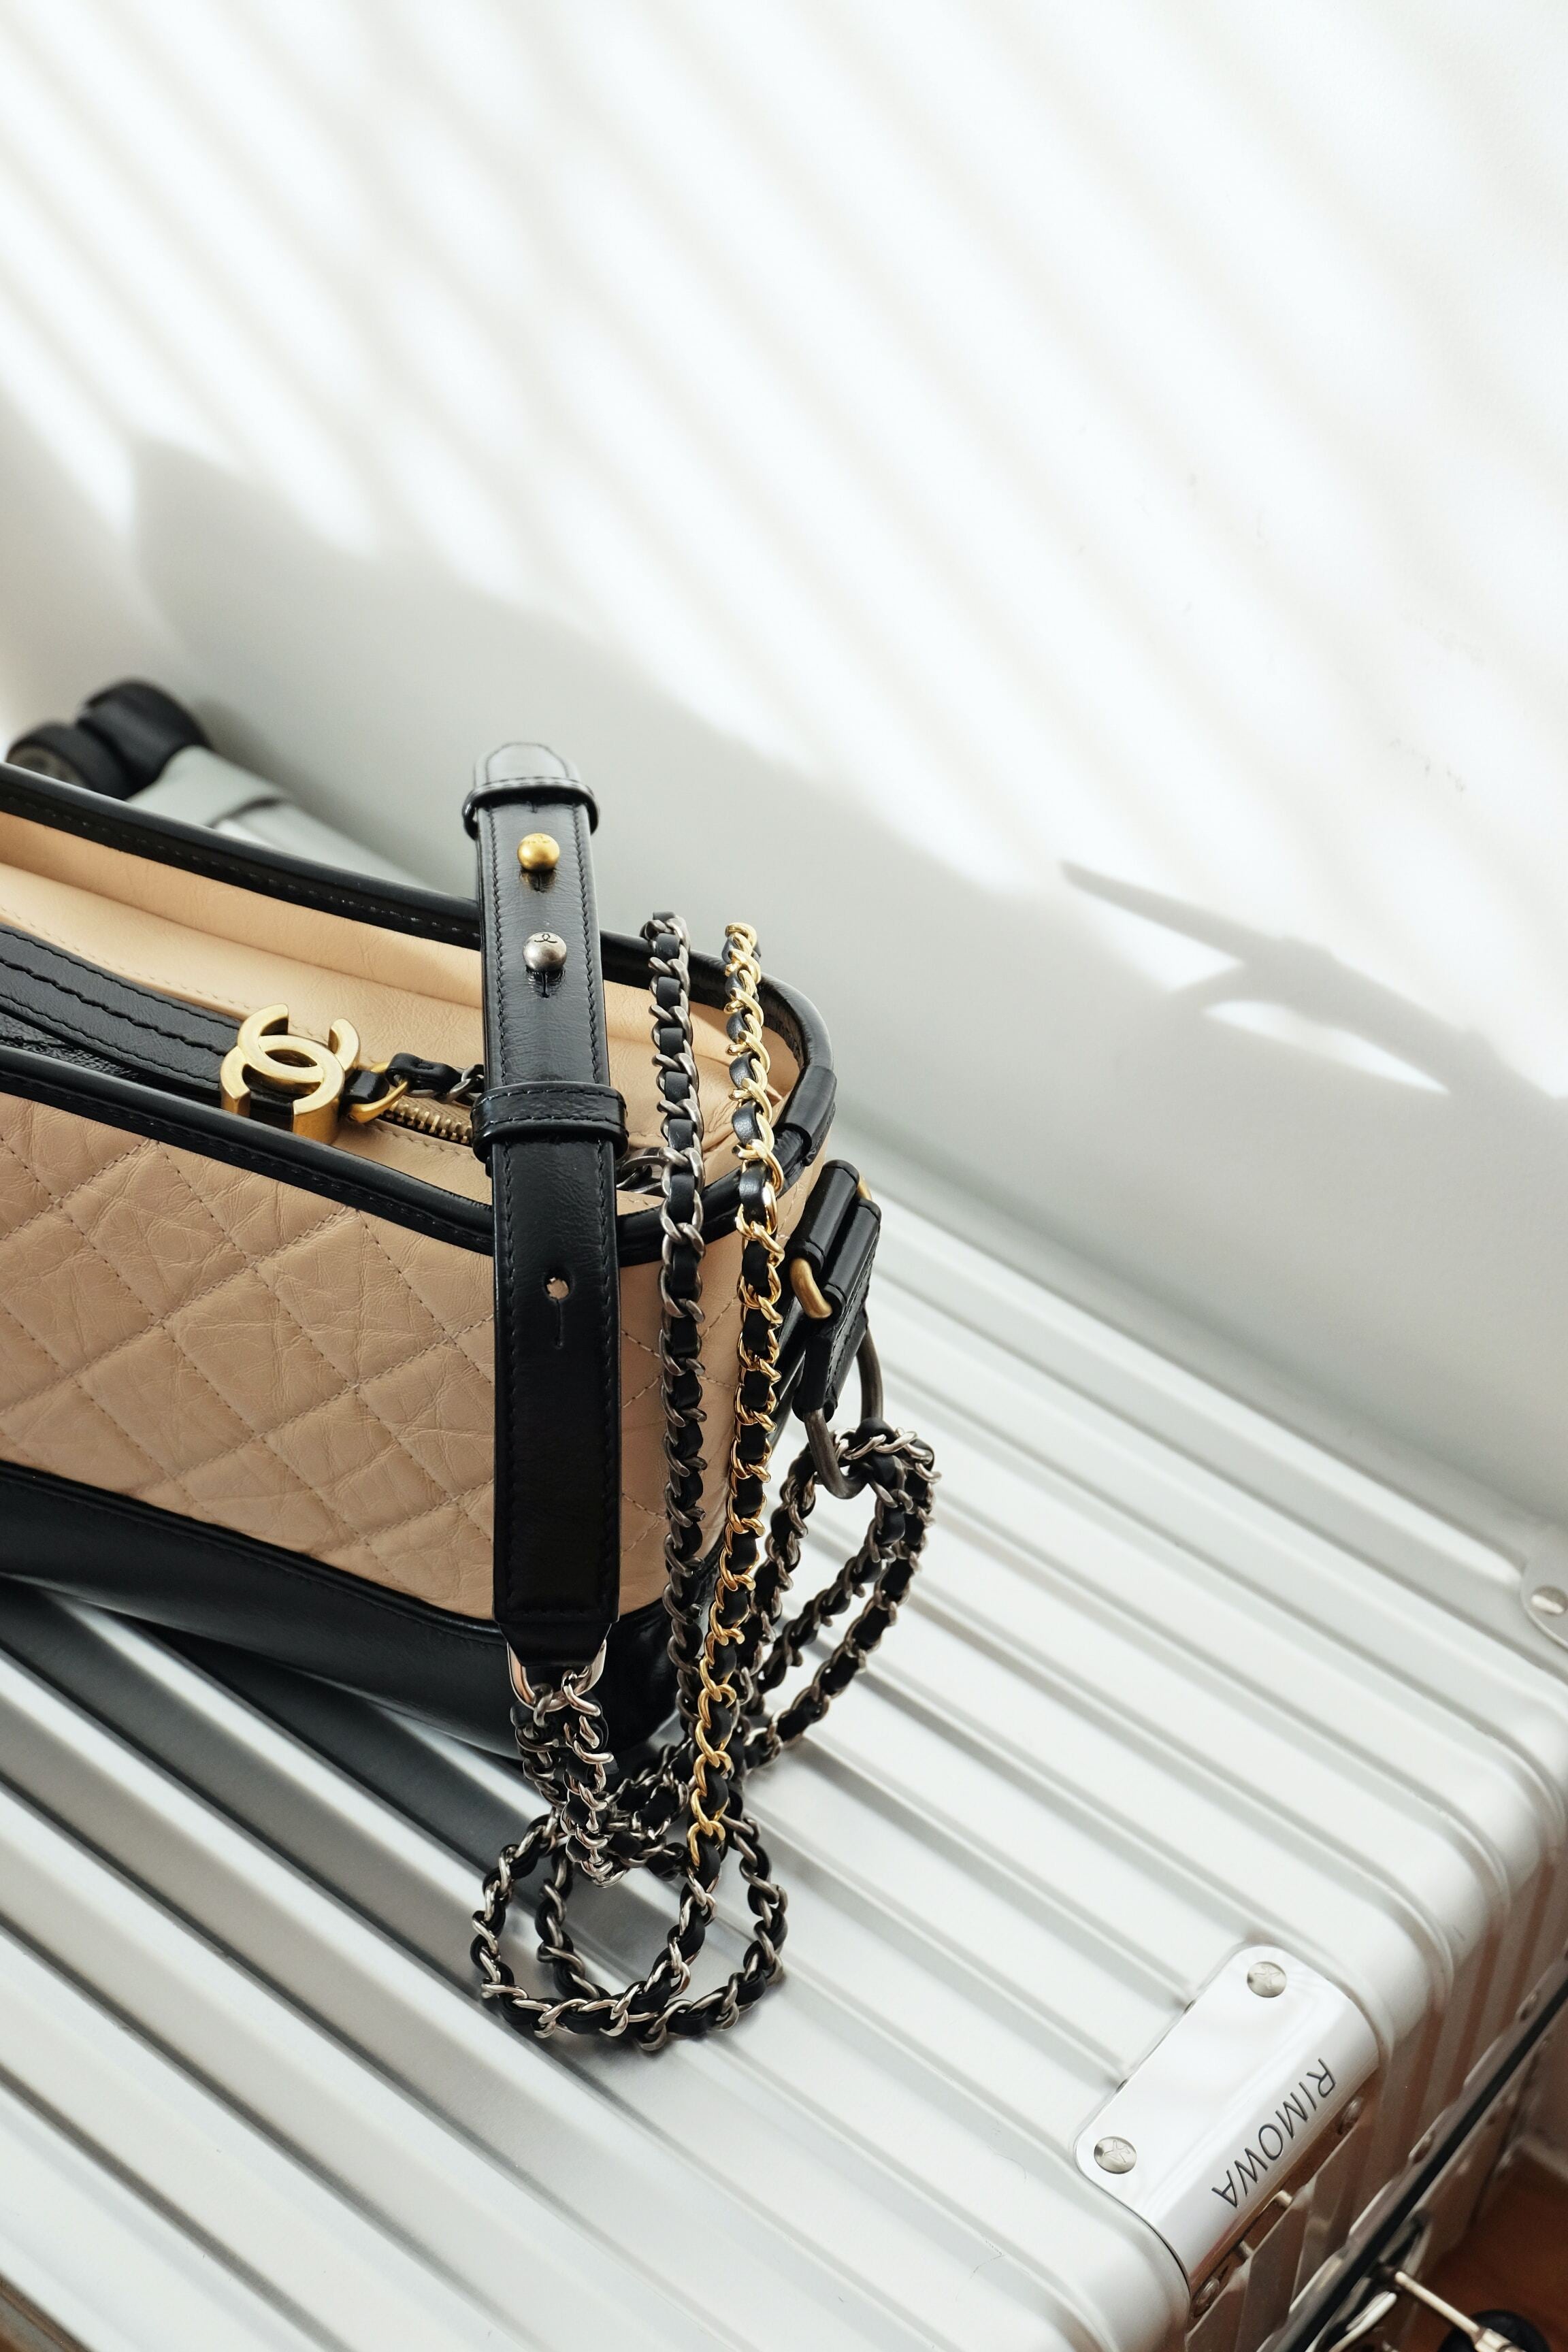 Chanel Beige and Black Gabrielle Bag places on a Rimowa Suitcase 